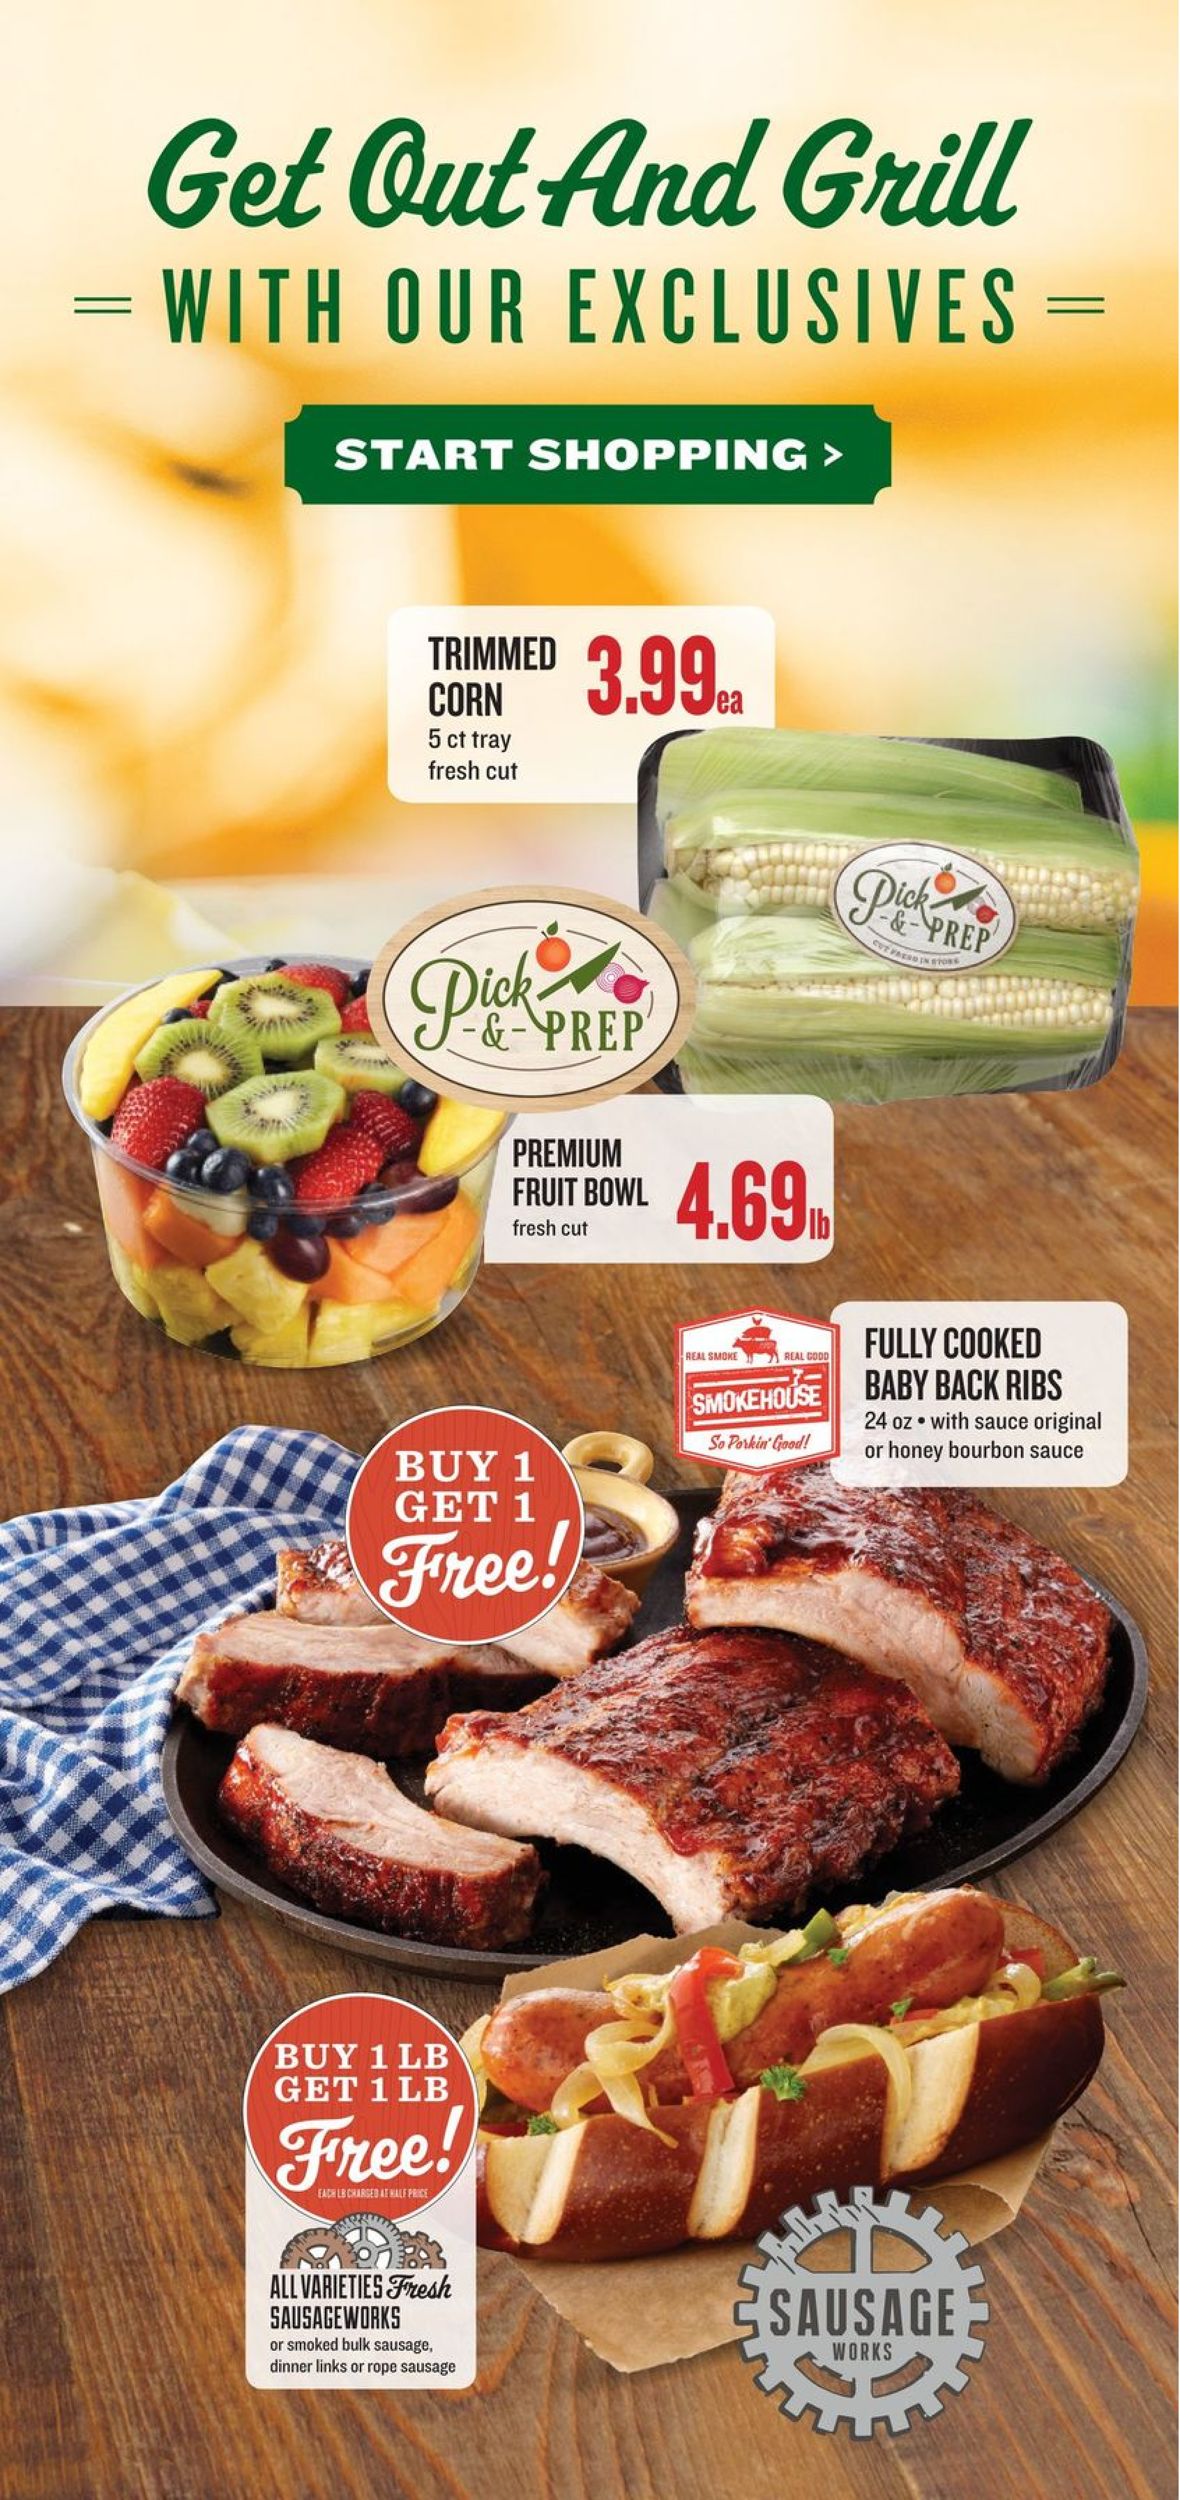 Lowes Foods Ad from 08/21/2019